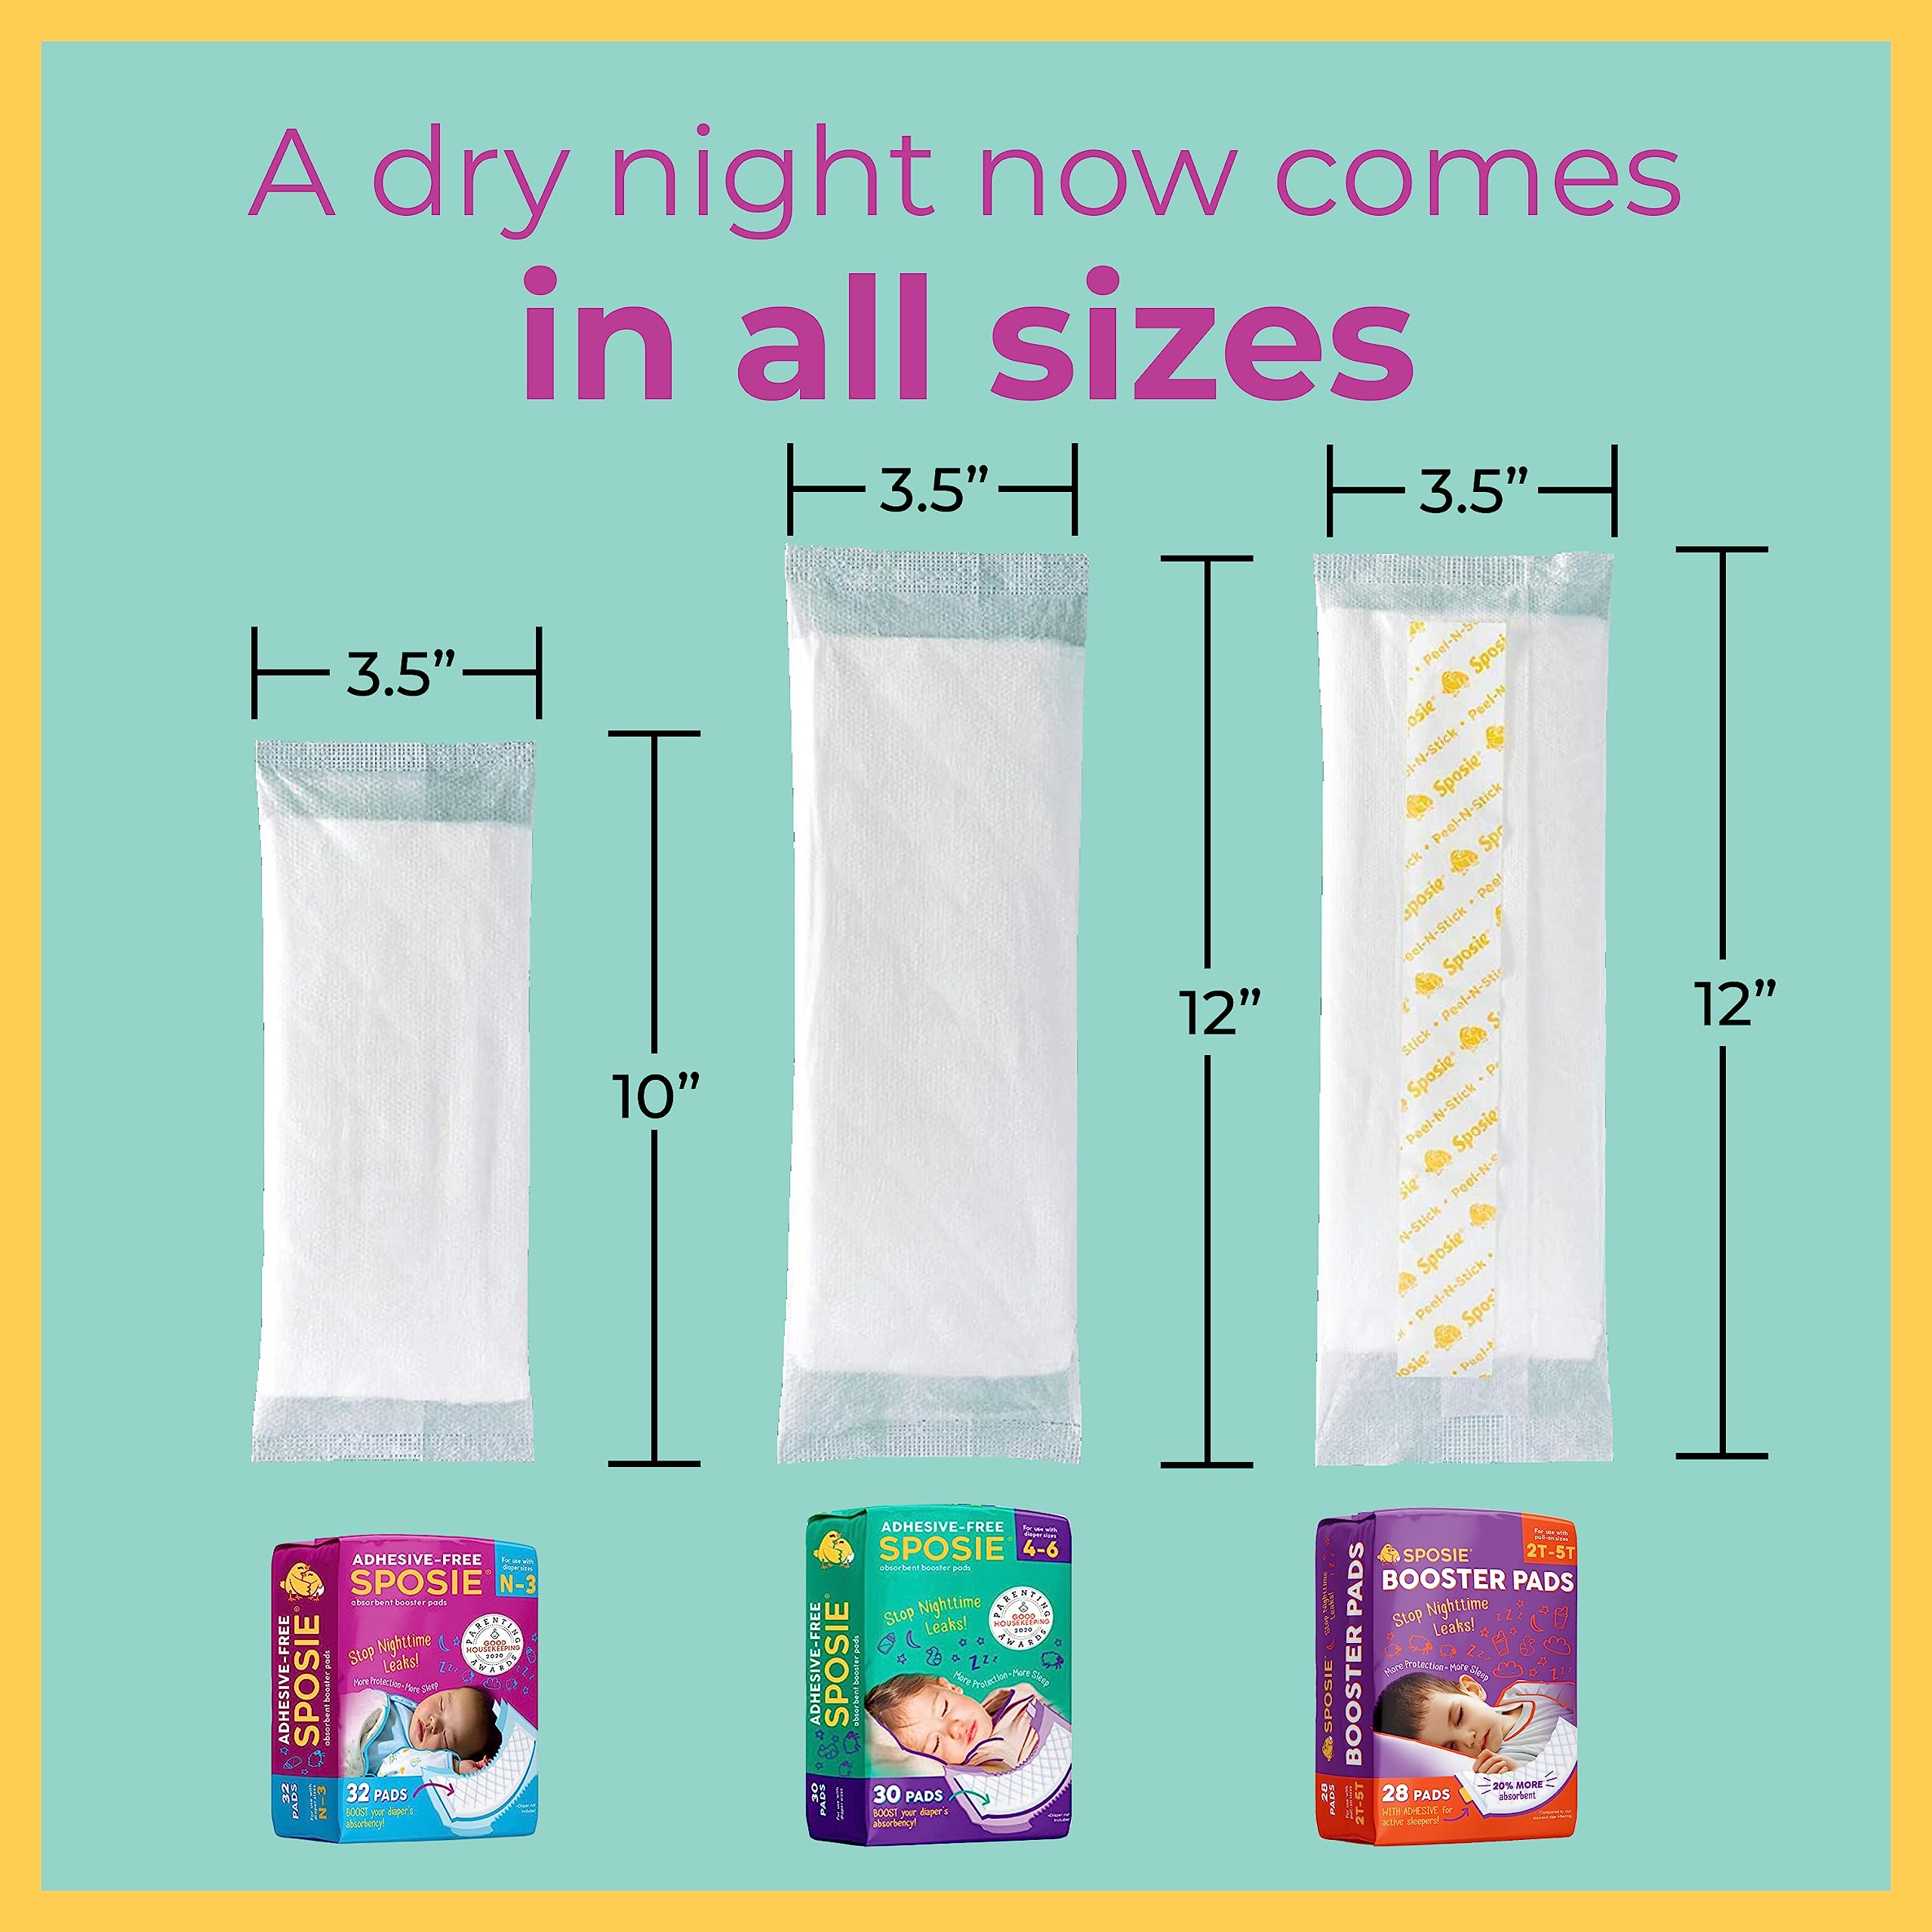 Sposie Diaper Booster Pads - Diaper Pads Inserts Overnight, Cloth Diaper Inserts and Overnight Diapers Size 4-6 & 2T-5T, Diaper Liners Baby Products, Nighttime Diapers